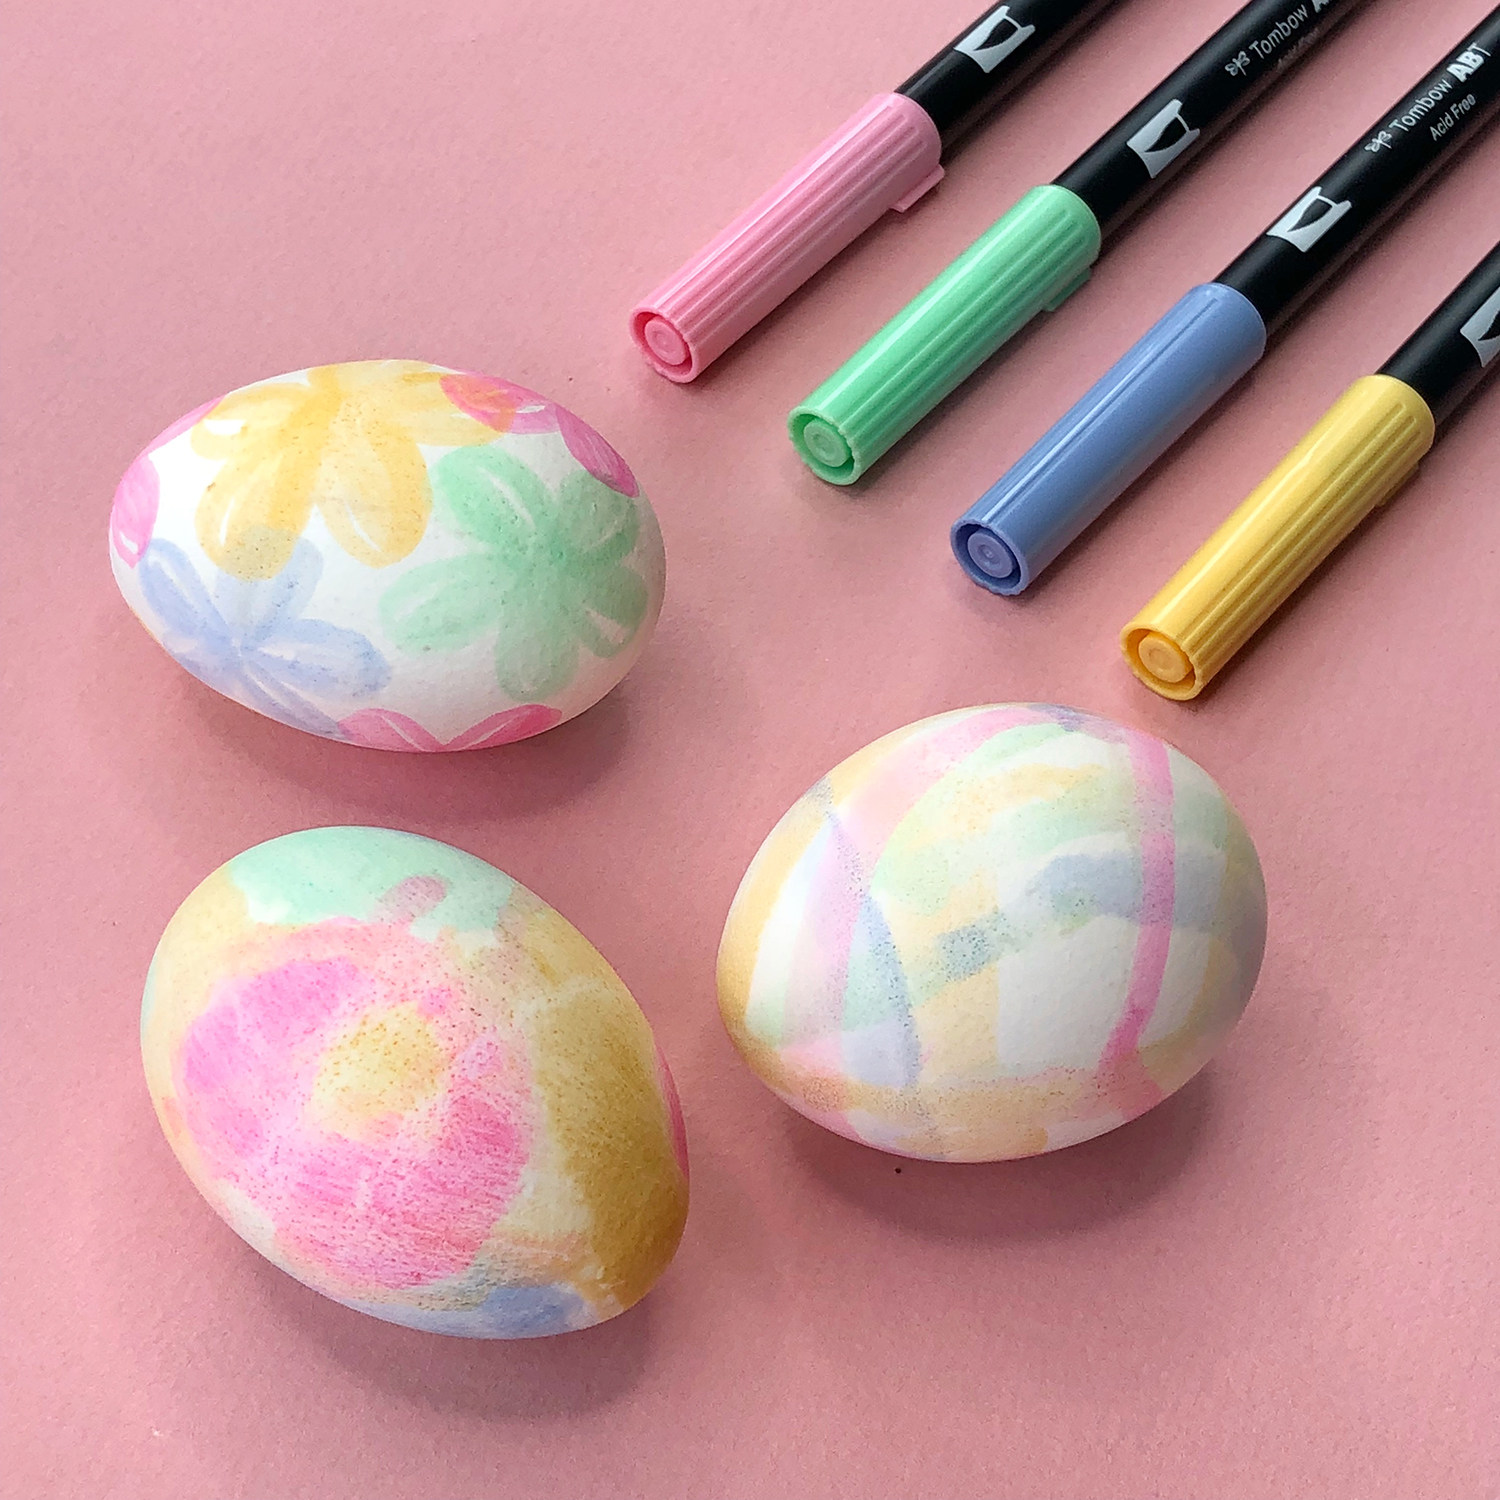 3 Watercolor Look Easter Egg Decorating Techniques Tombow